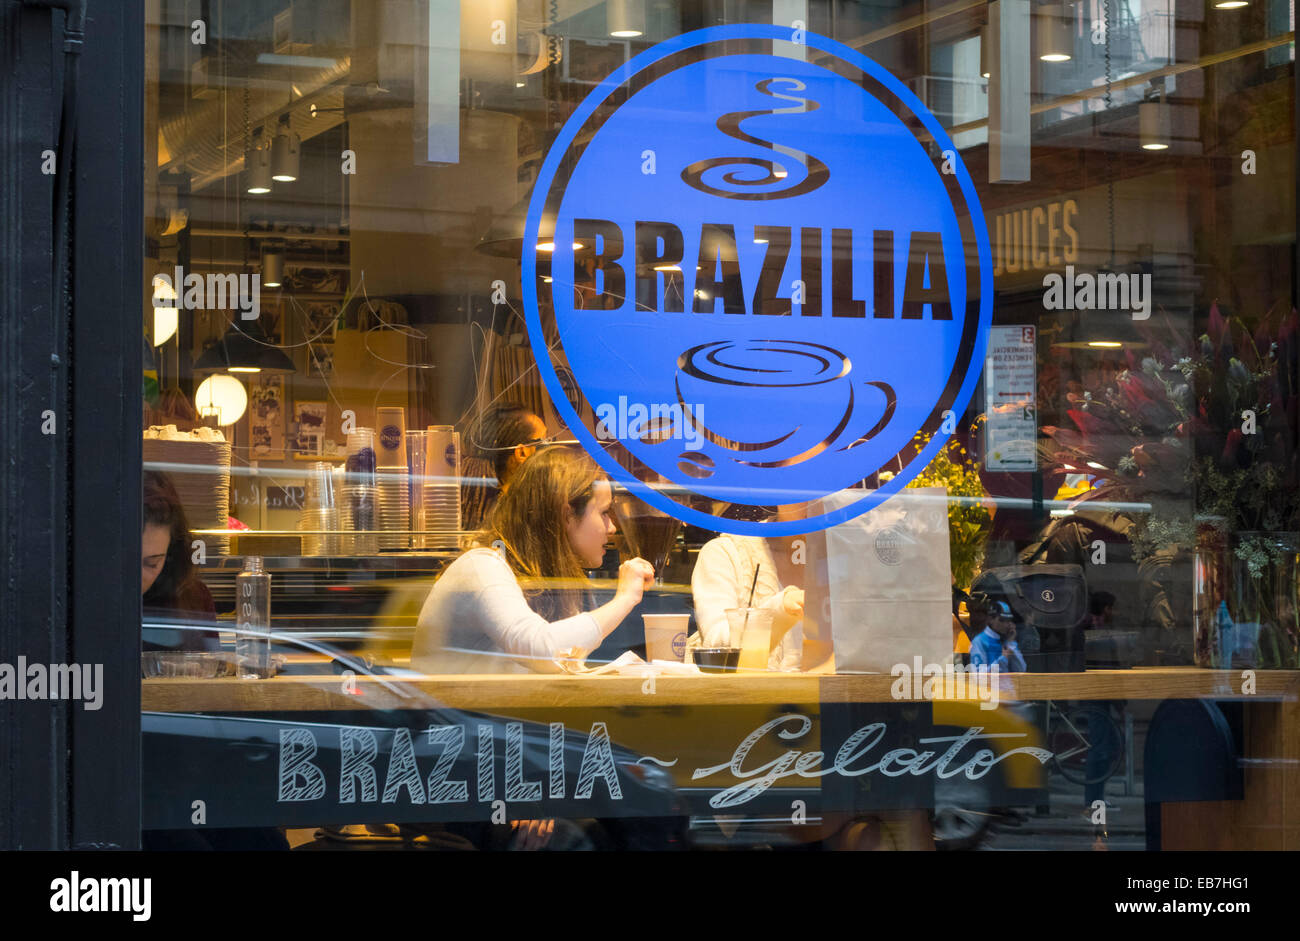 Brazilia coffee and snack bar that features gelato in New York City Stock Photo